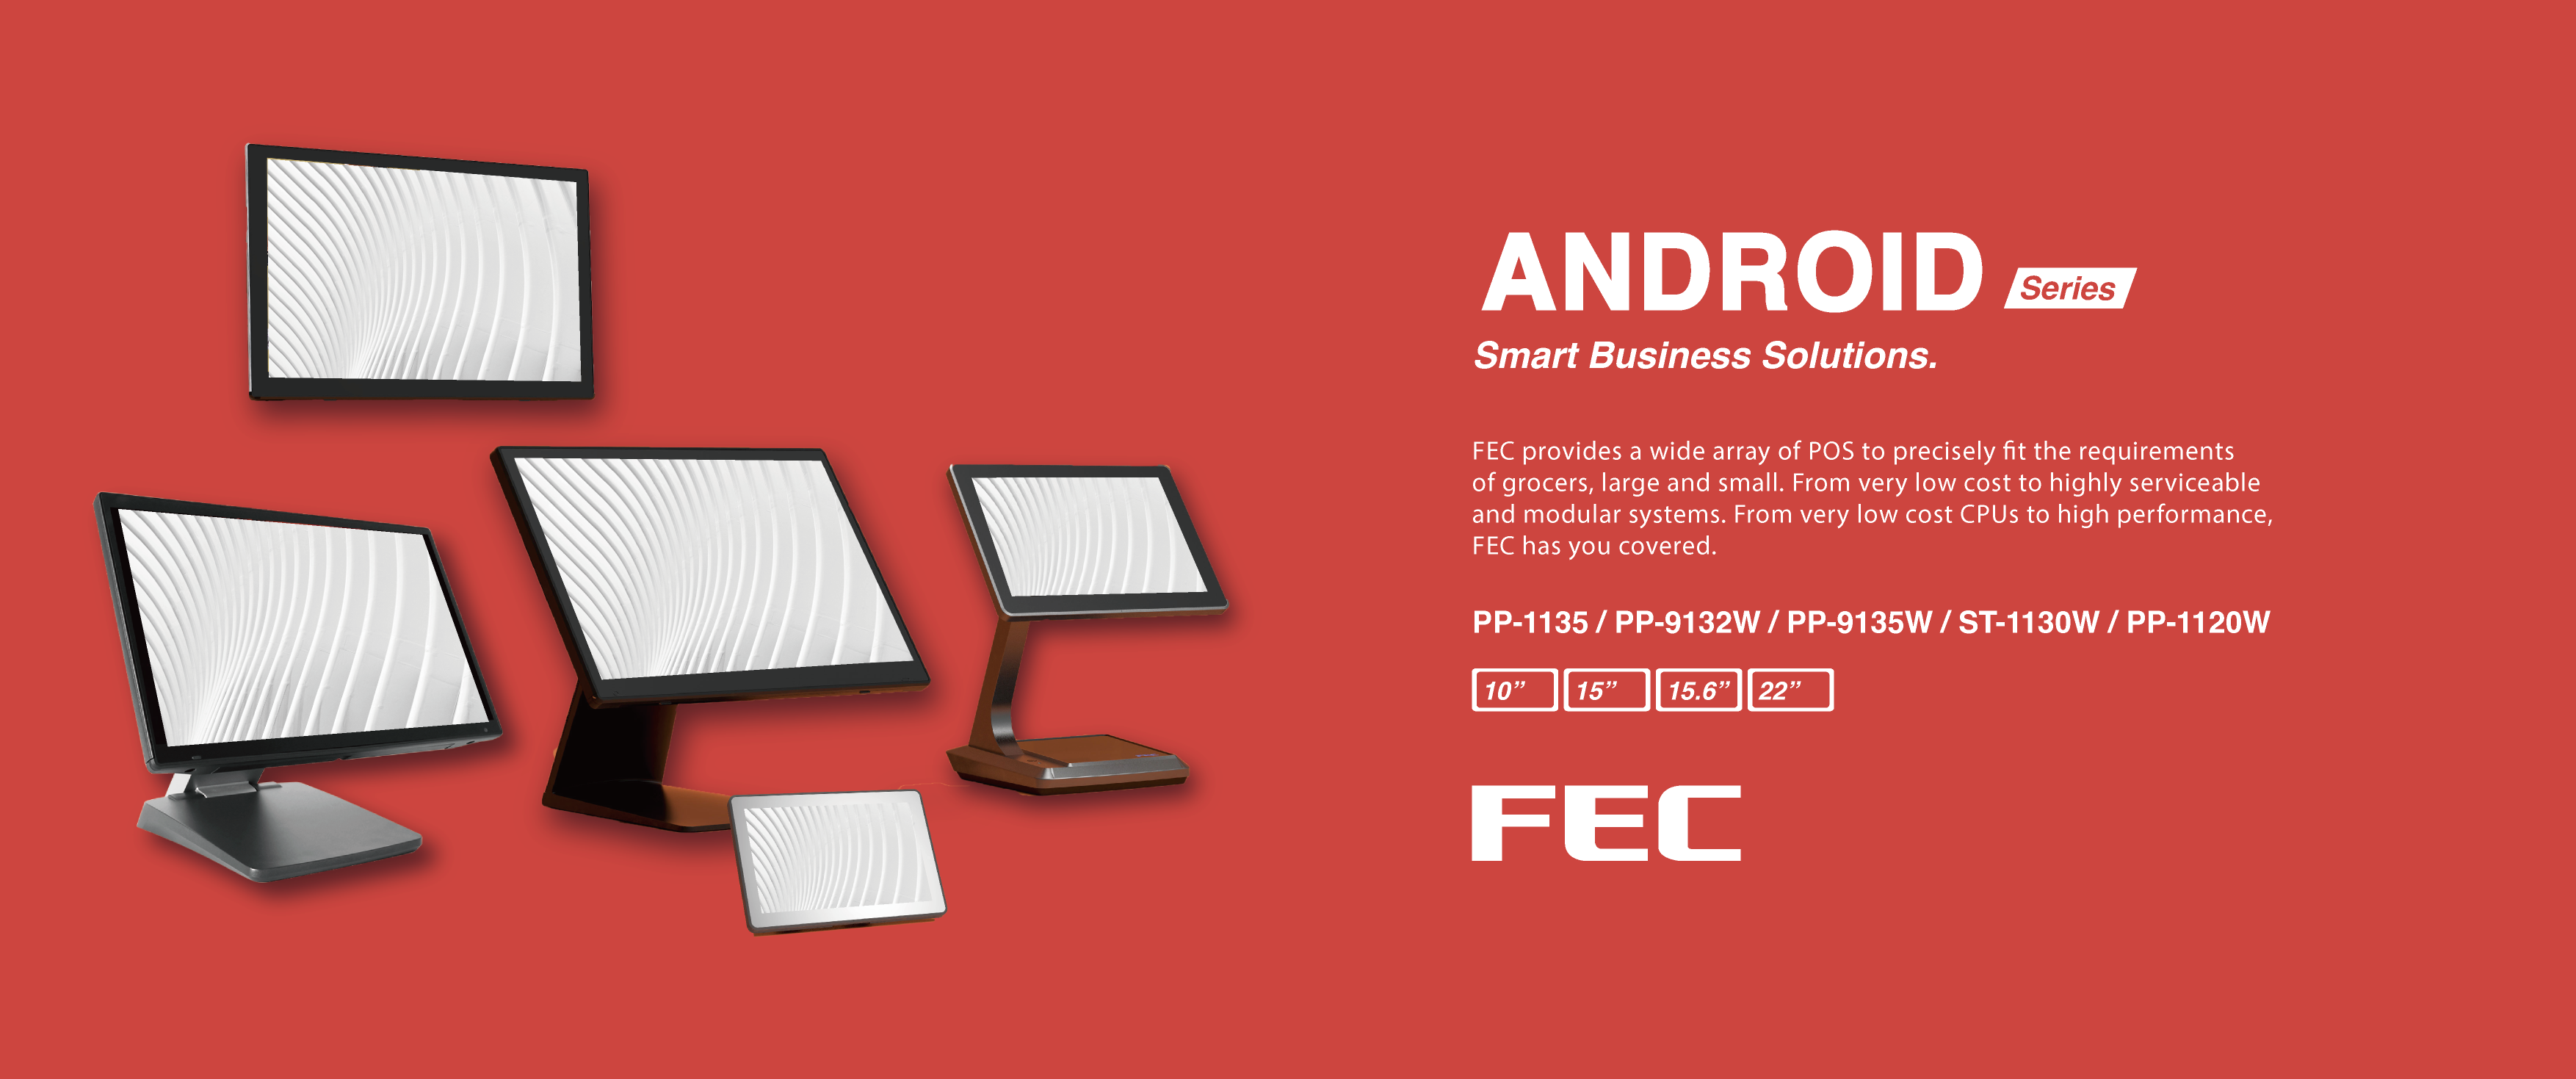 FEC Android: Smart Business Solutions